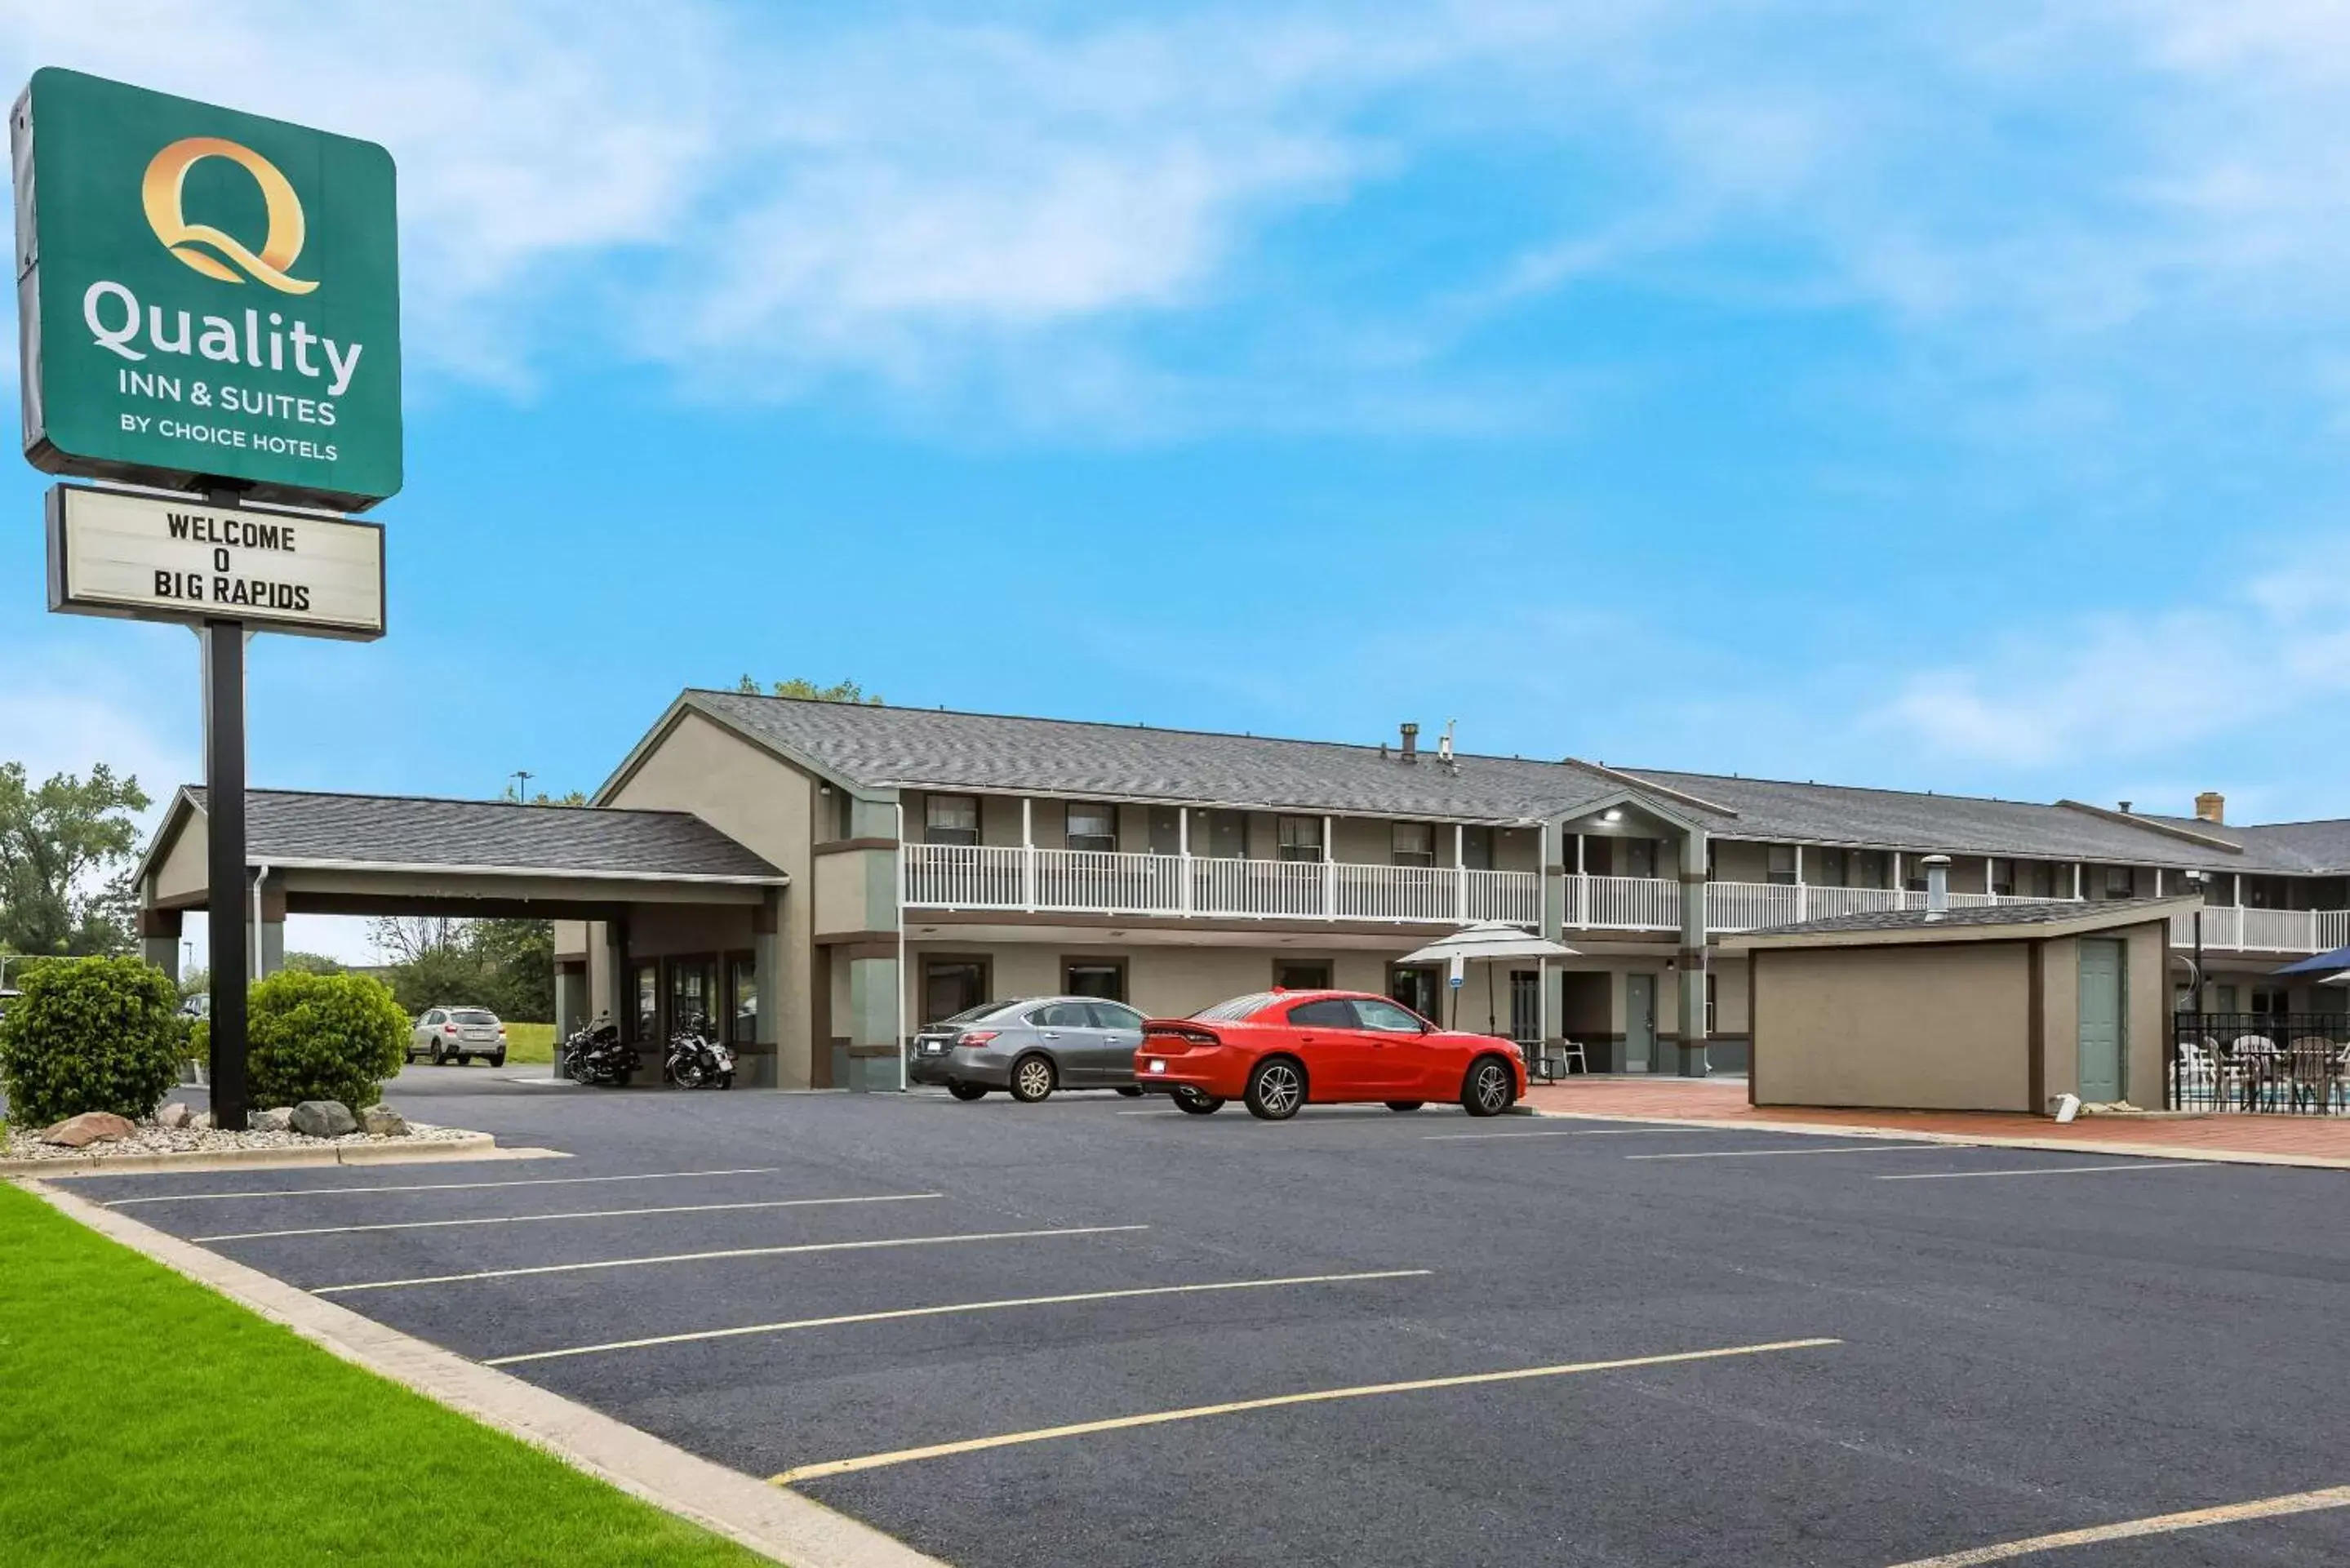 Property Building in Quality Inn & Suites Big Rapids